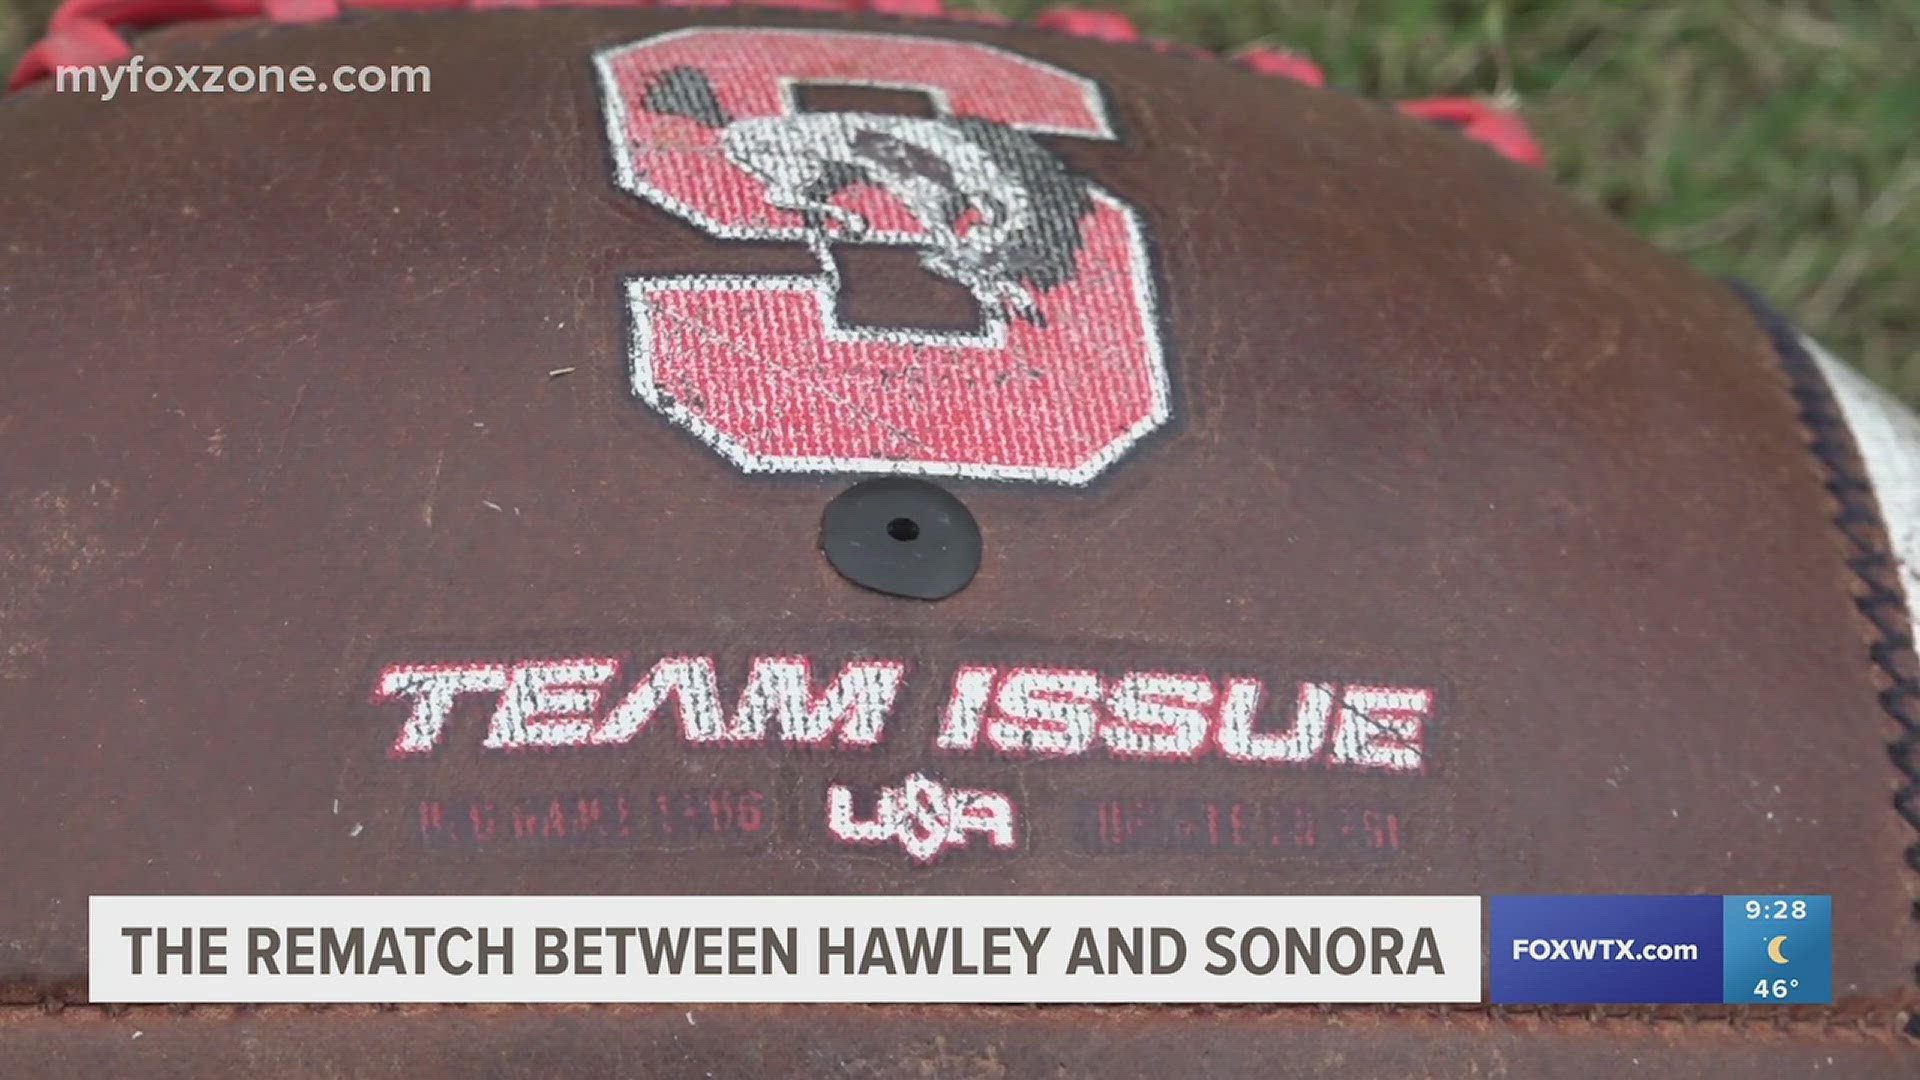 In one of the biggest games of the season, the Sonora Broncos take on the Hawley Bearcats on Friday, November 24th.